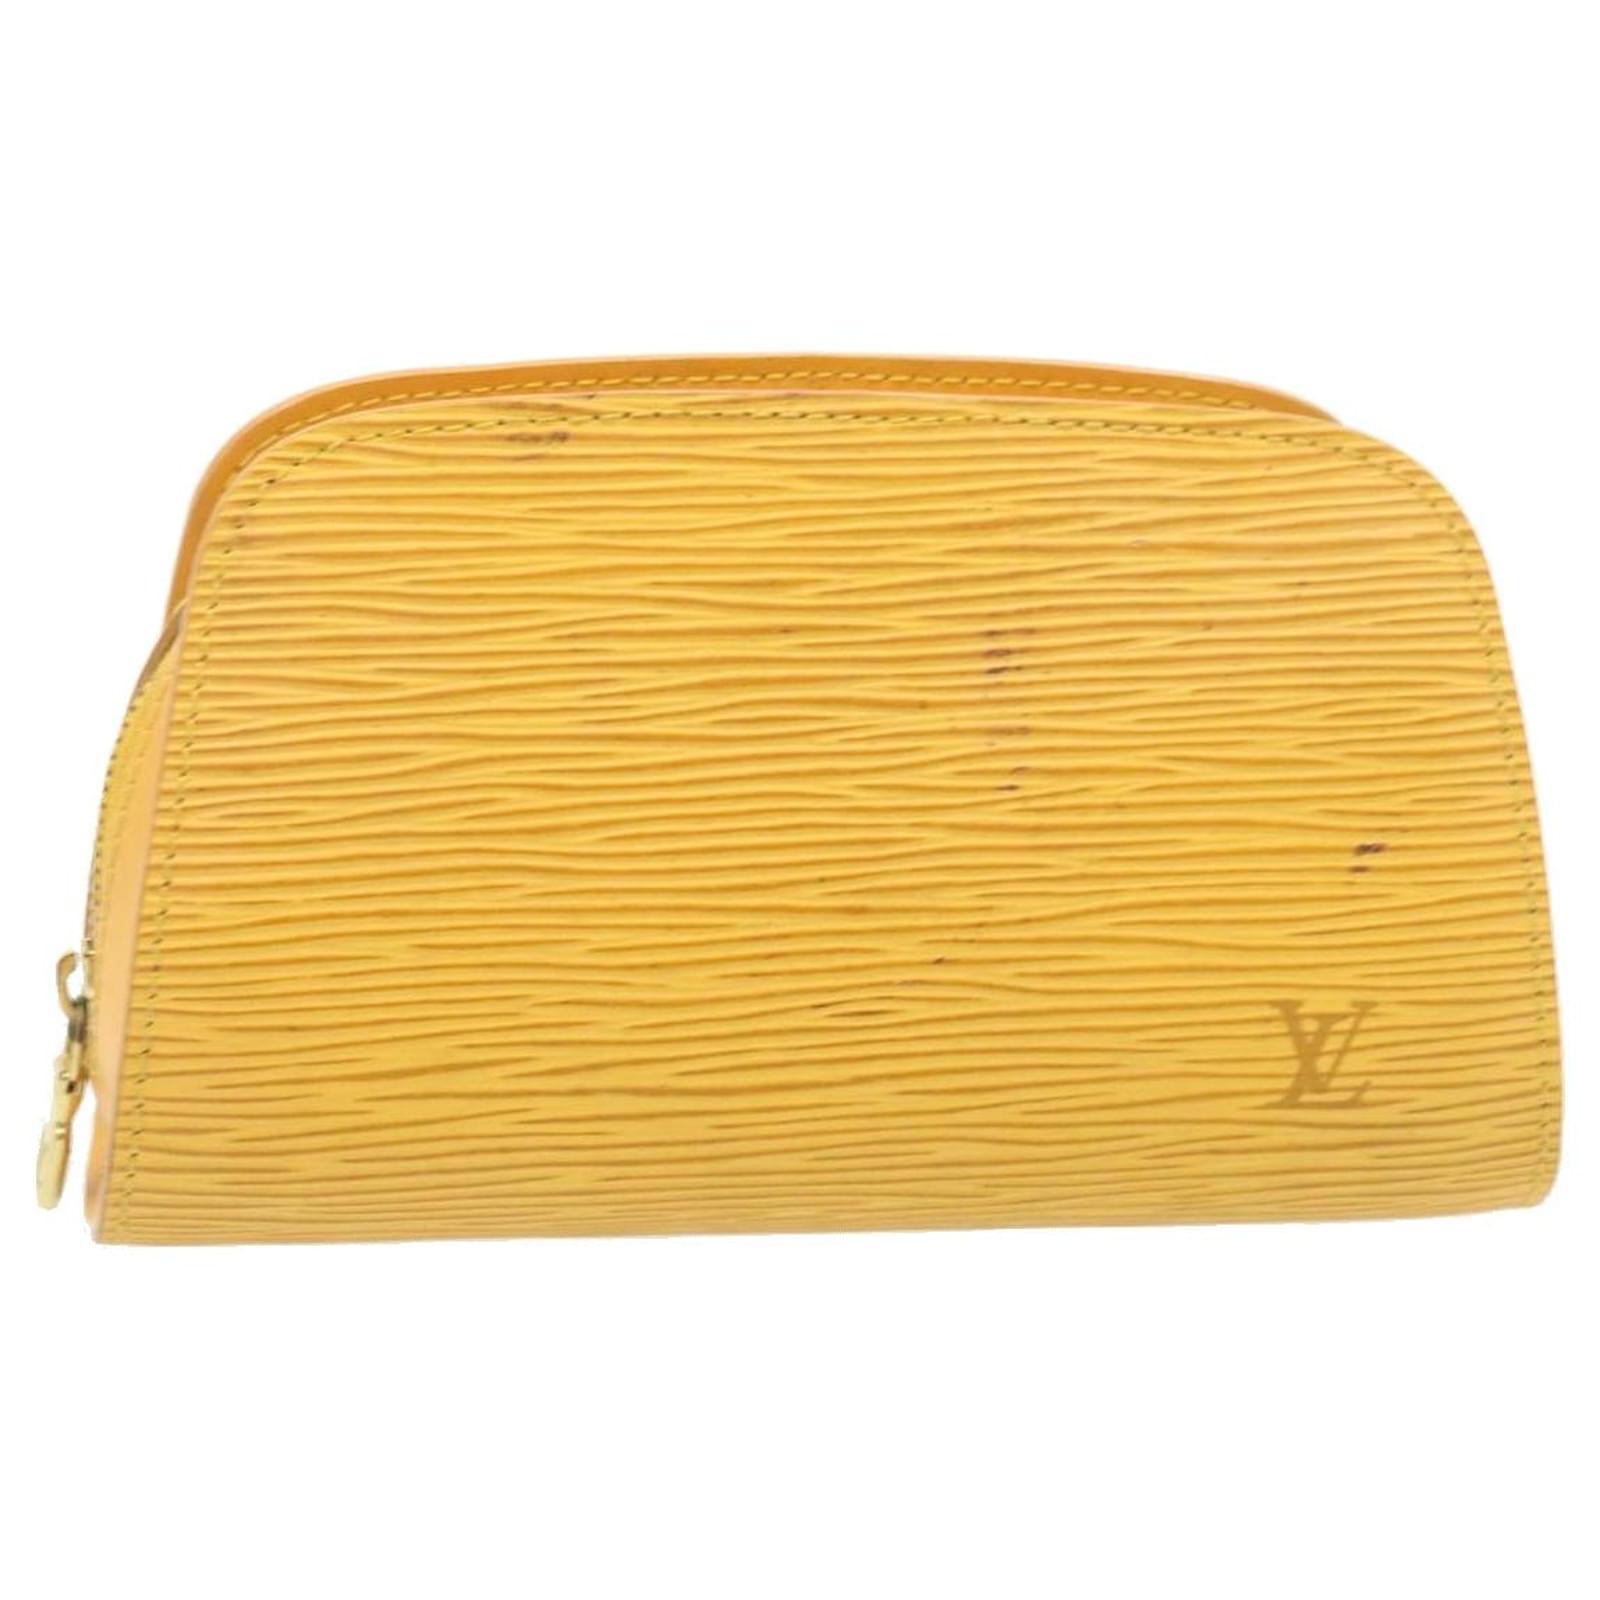 Louis Vuitton Cosmetic Pouch Epi Leather